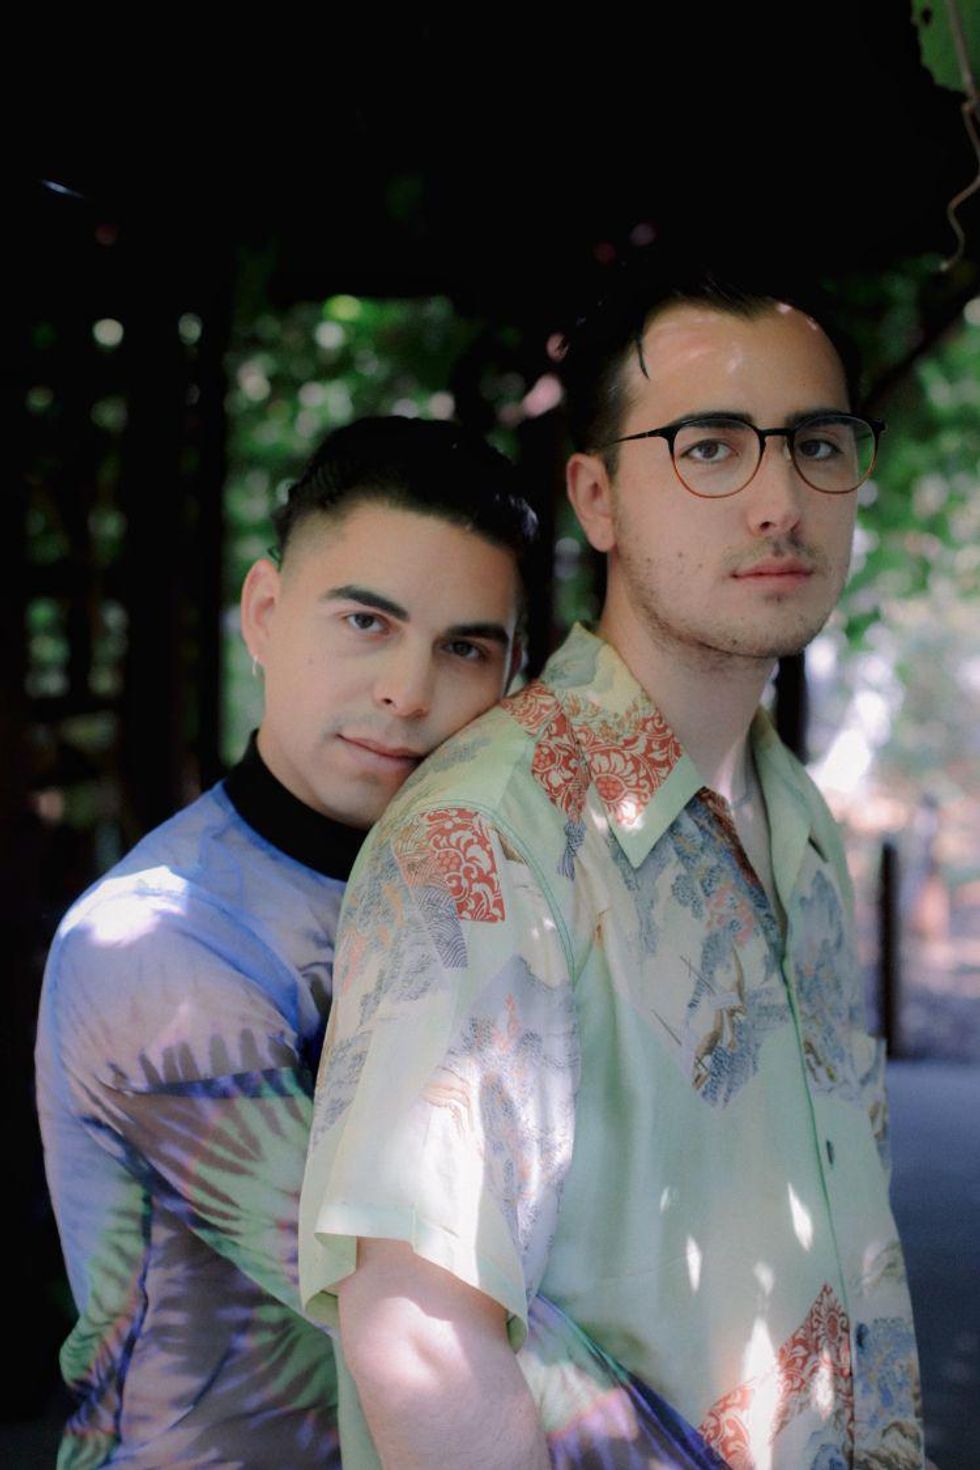 TWINKIDS Makes Sad Gay Electronic Music for the Soul